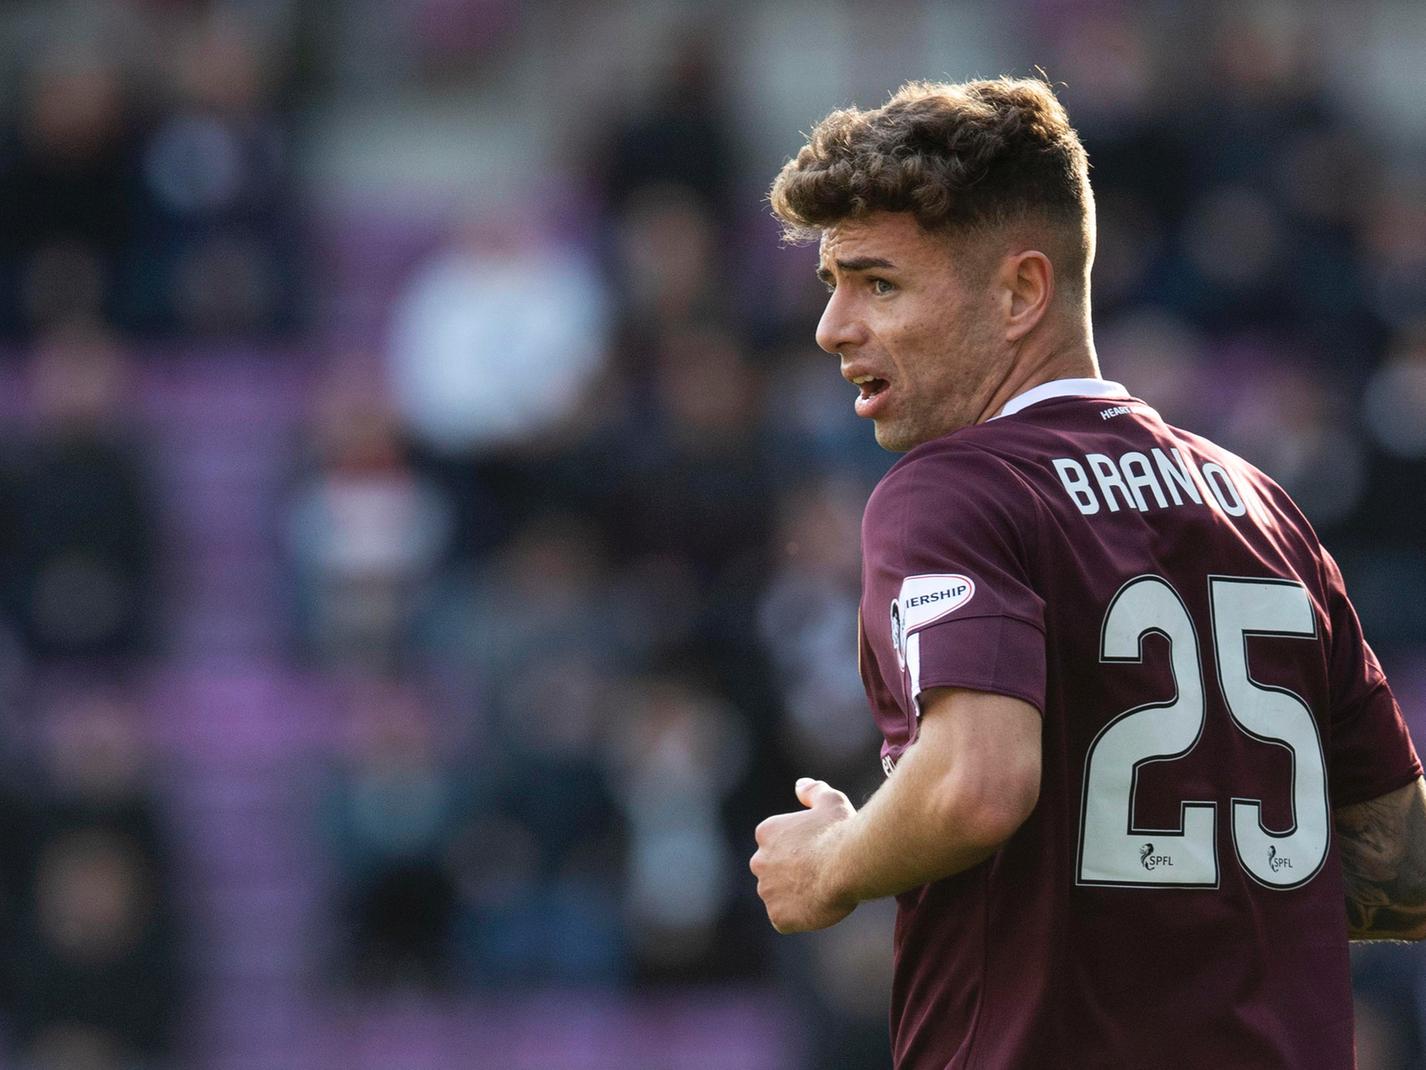 Had one shaky moment where a poor pass almost put Hearts in danger, but played a couple of useful balls forward and was solid enough. Subbed on 62 minutes